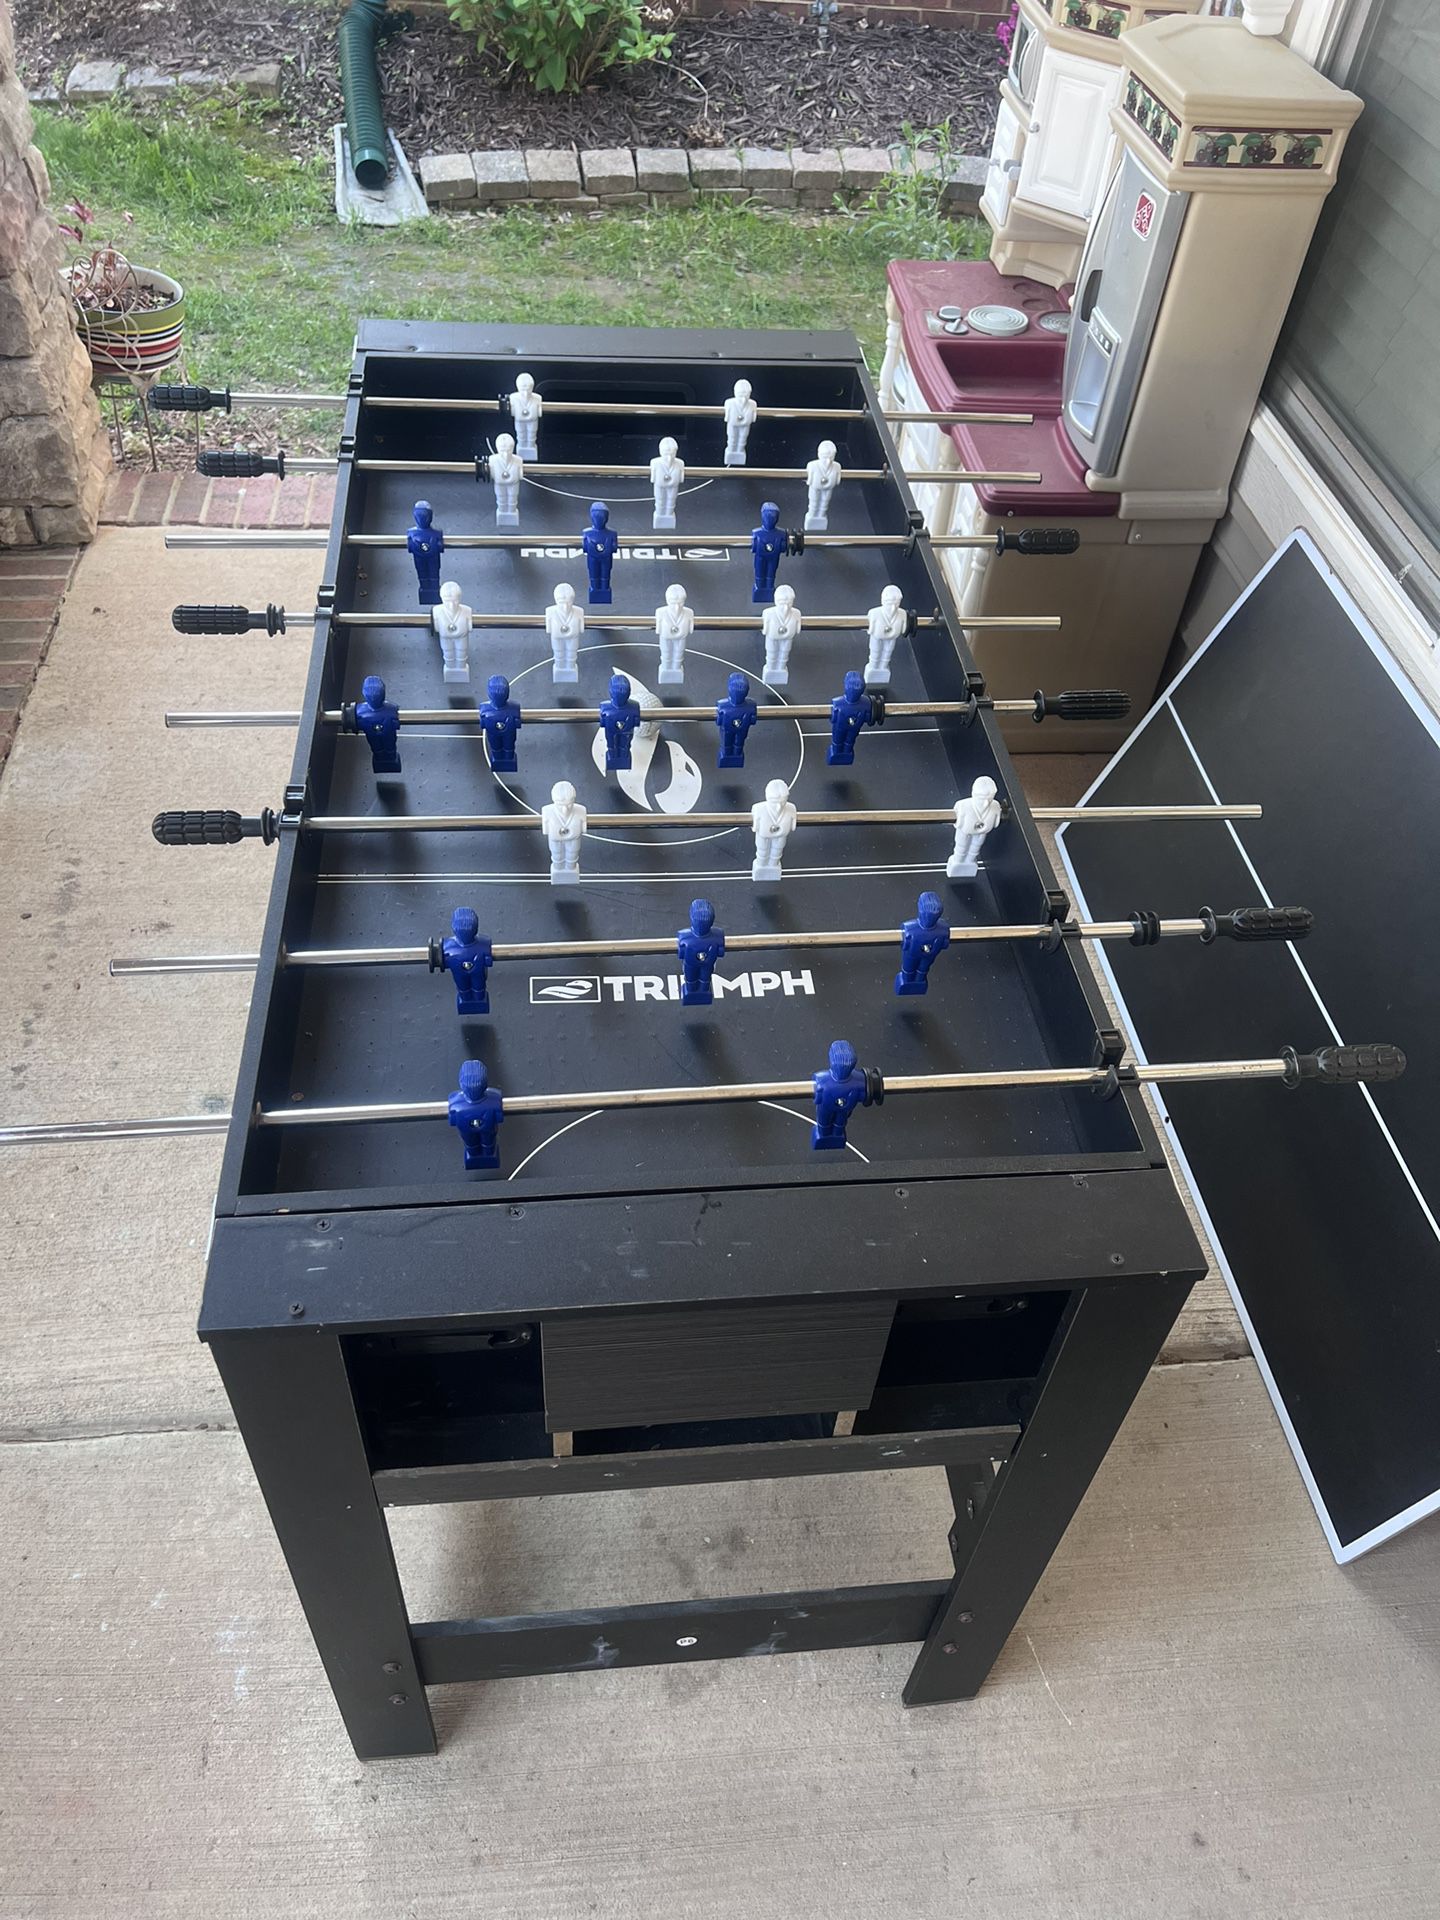 Selling  a complete football table with the option to switch to ping-pong and pool games. 